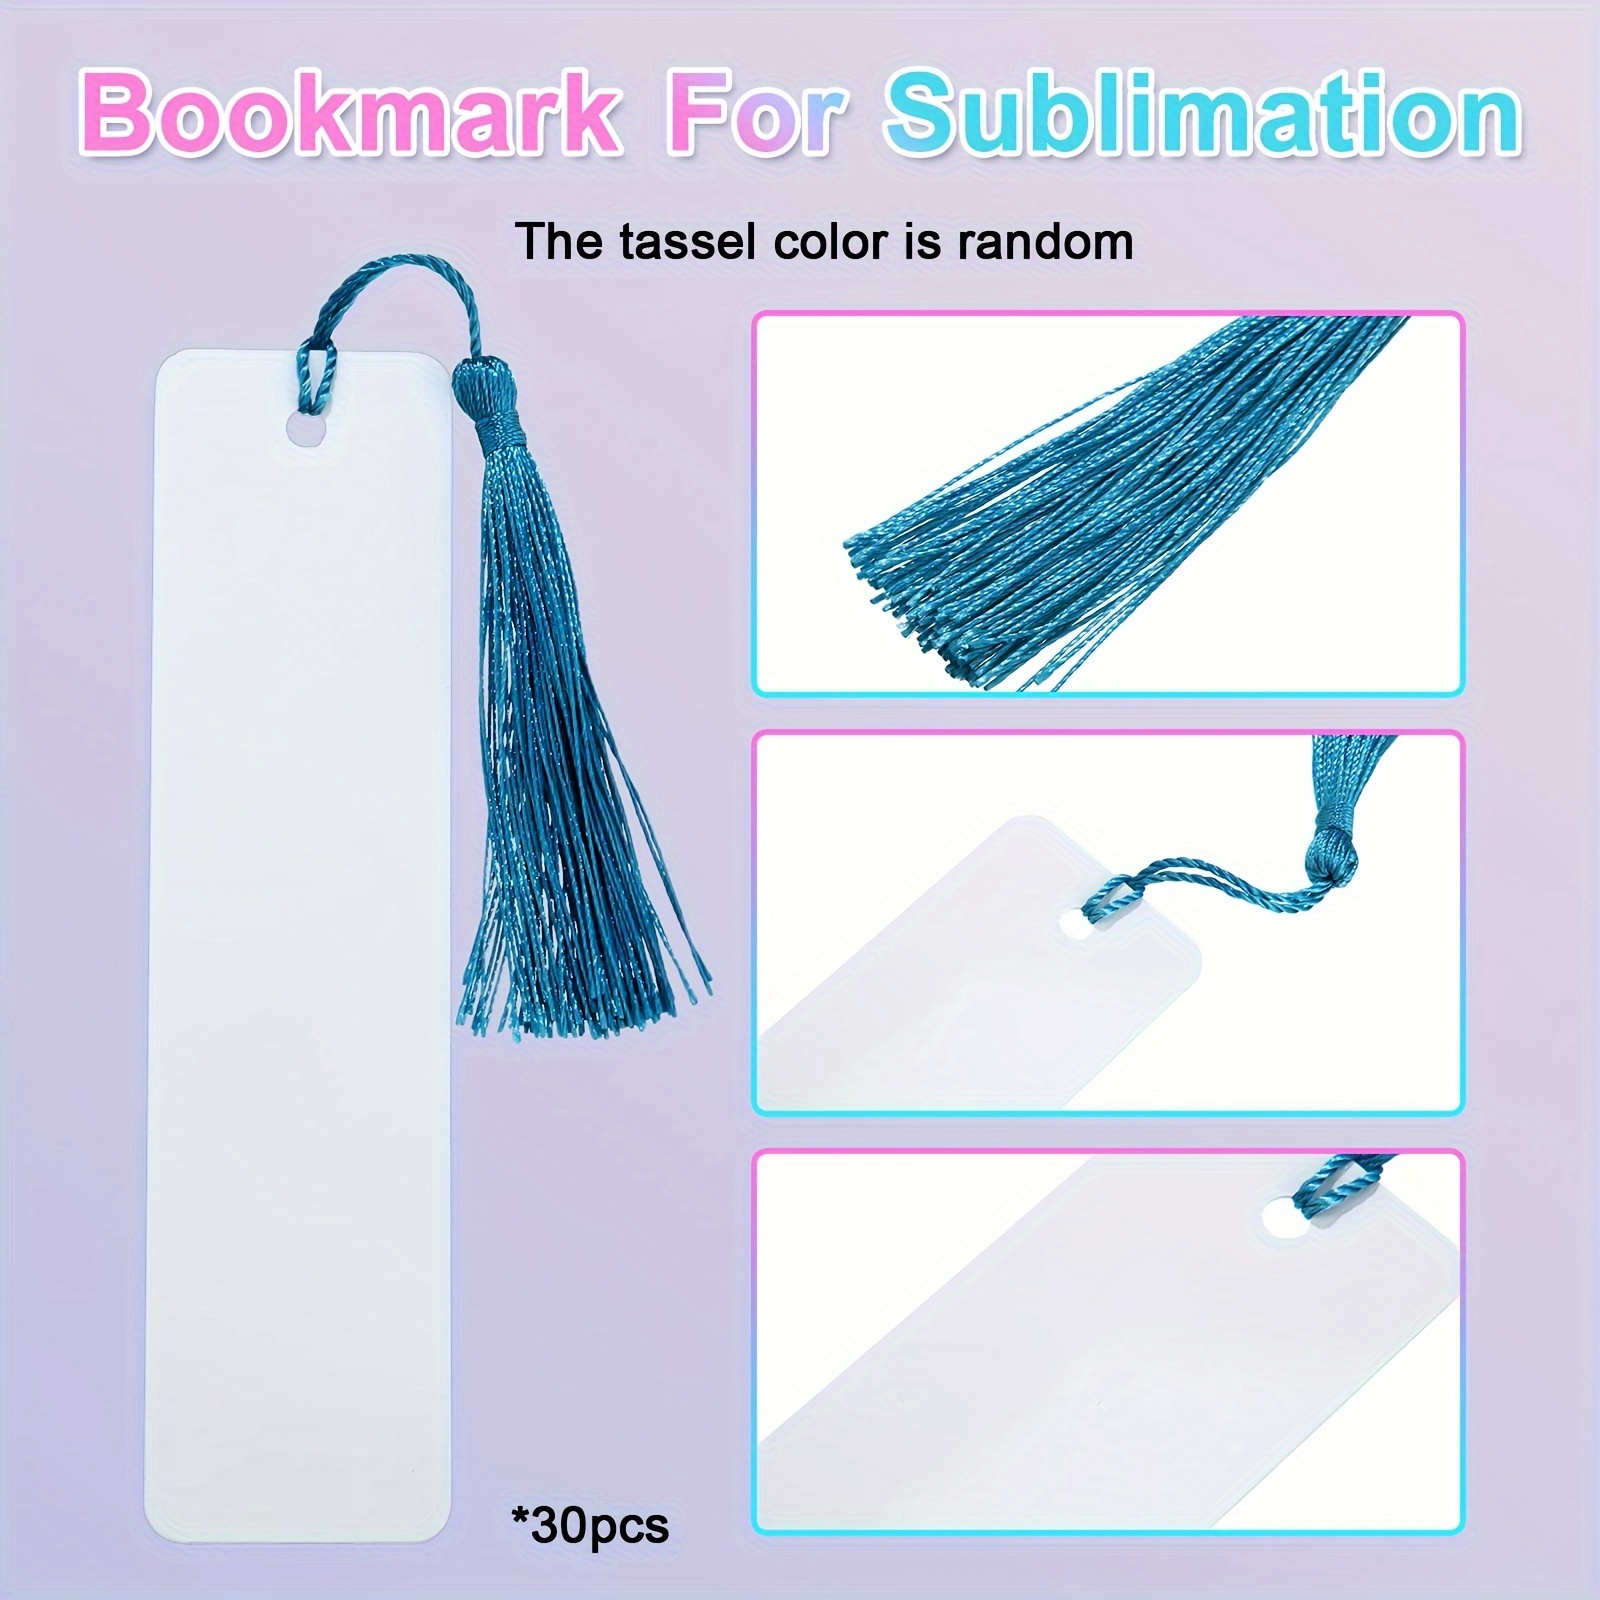 40pcs Heat Transfer Sublimation Blank Metal Bookmark, Aluminum DIY Bookmarks with Colorful Tassels for Keychains Craft Projects Birthday Present Tags